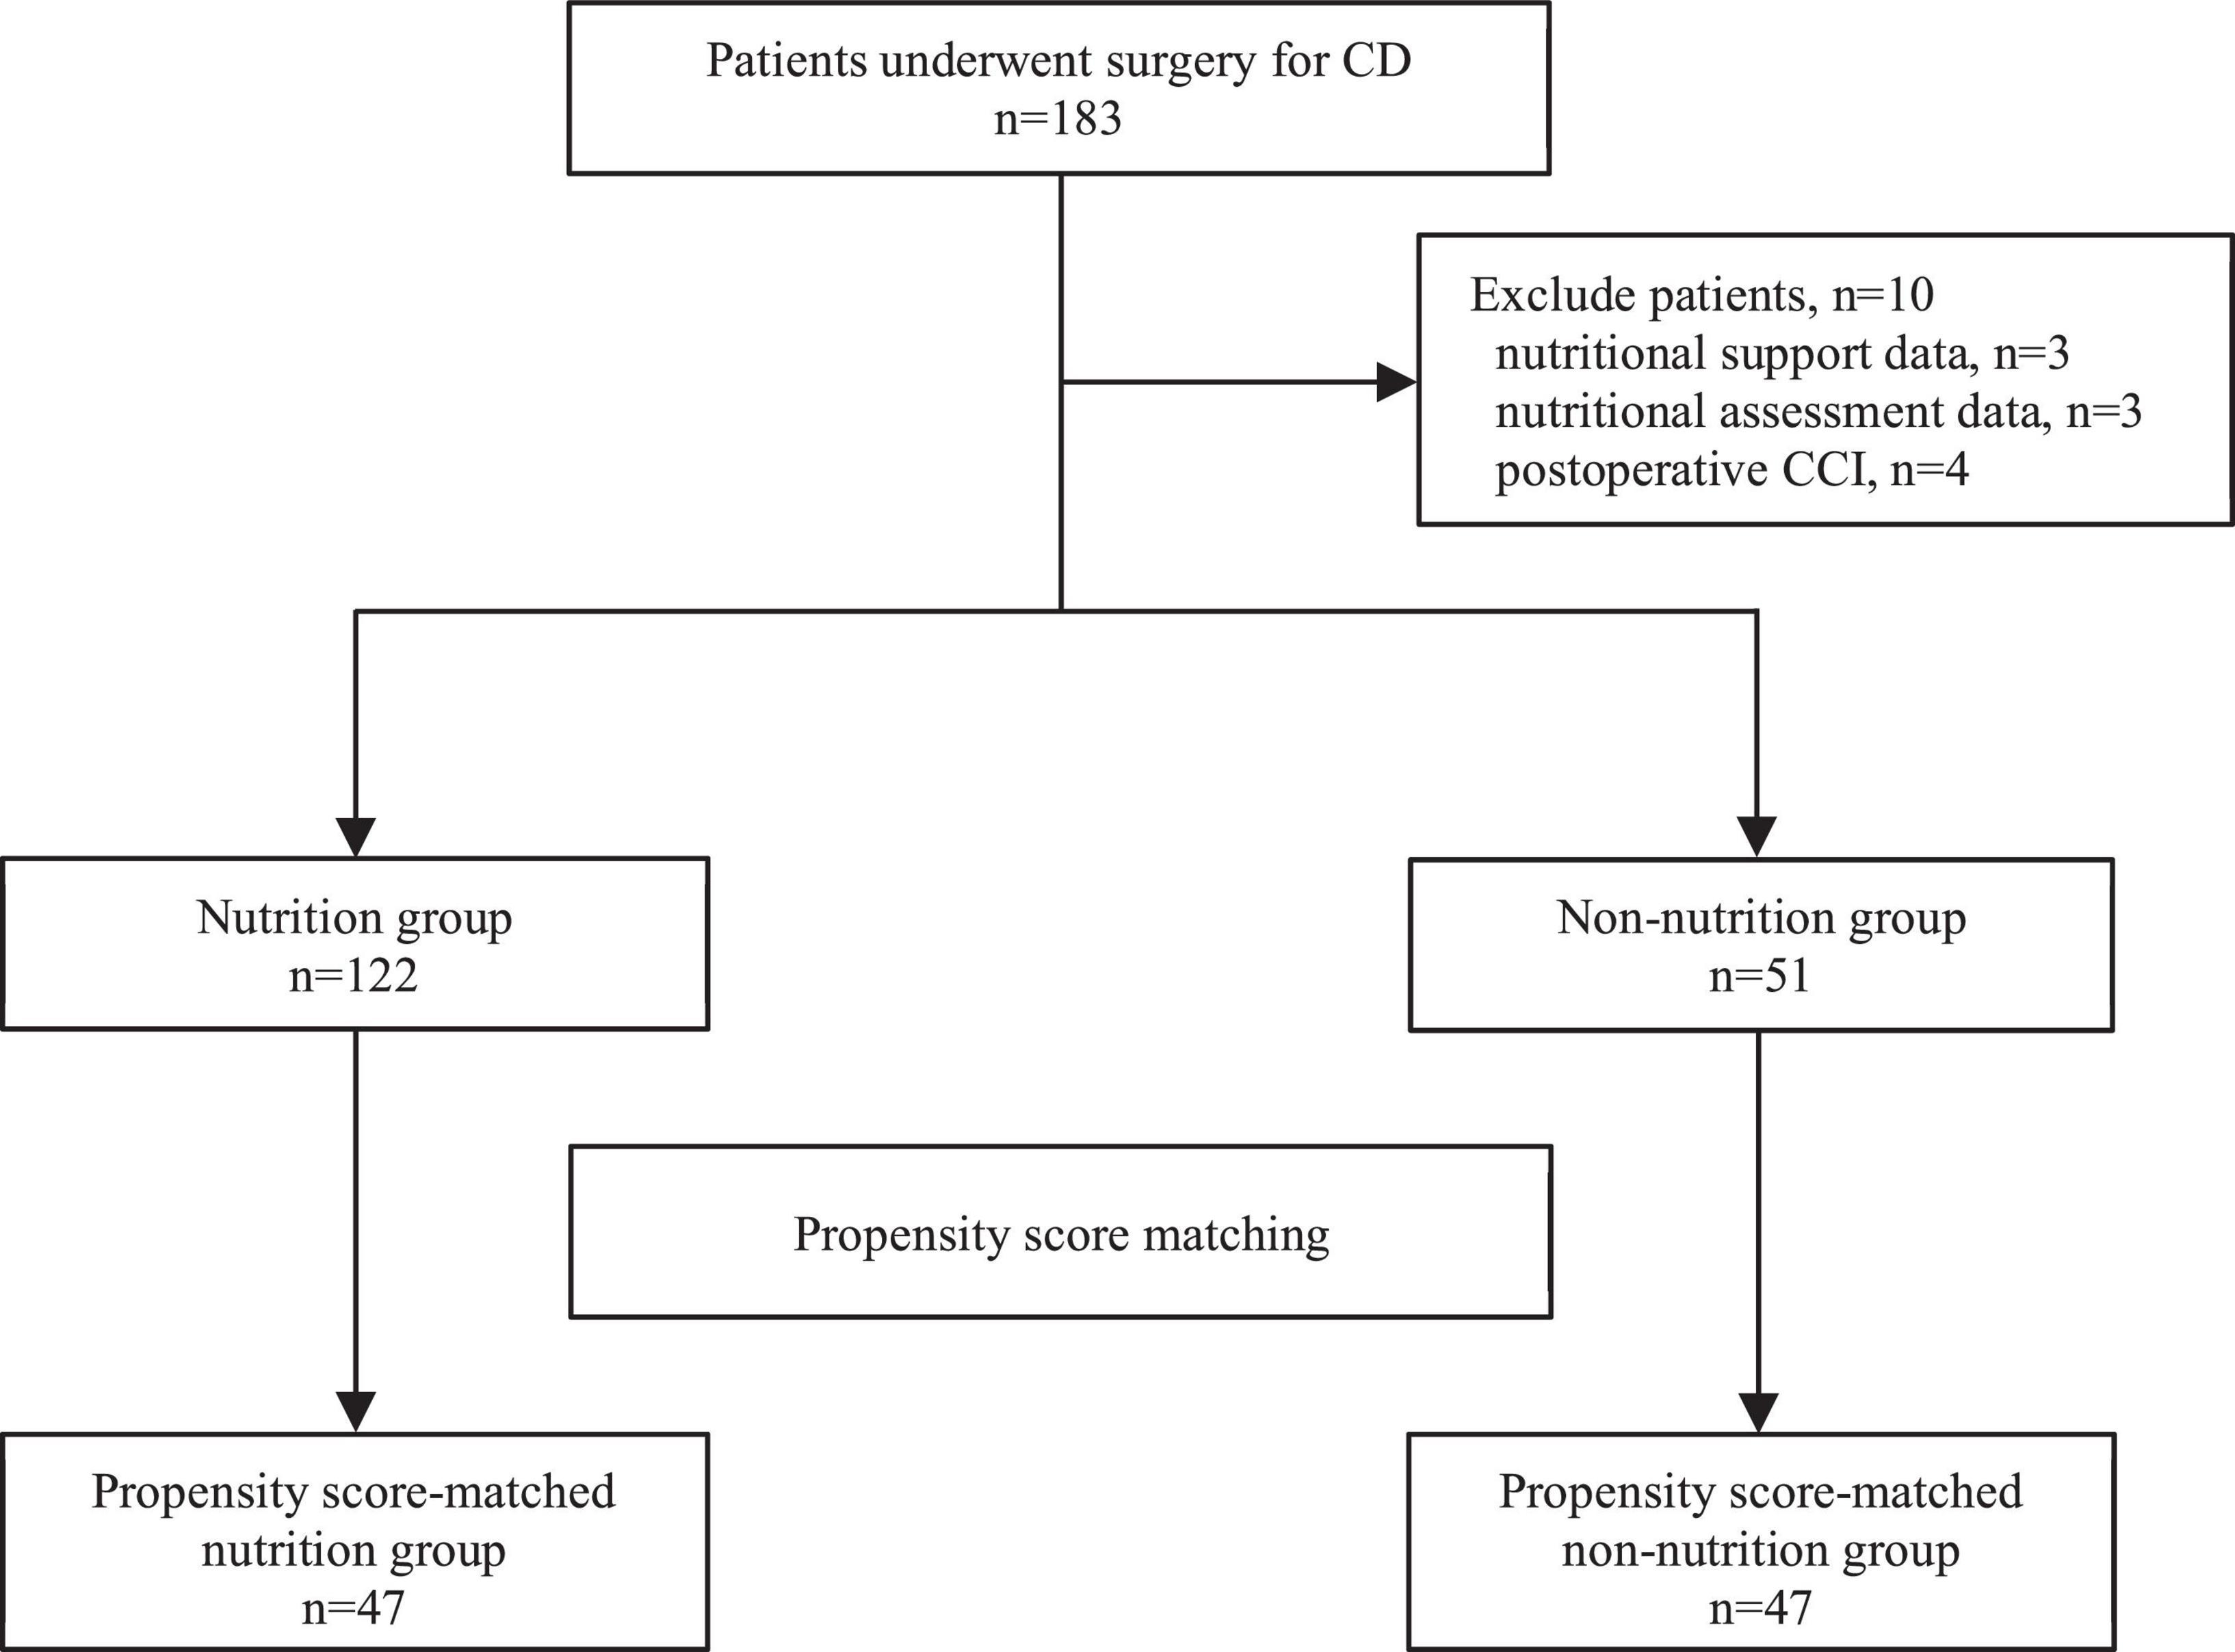 Role of perioperative nutritional status and enteral nutrition in predicting and preventing post-operative complications in patients with Crohn’s disease